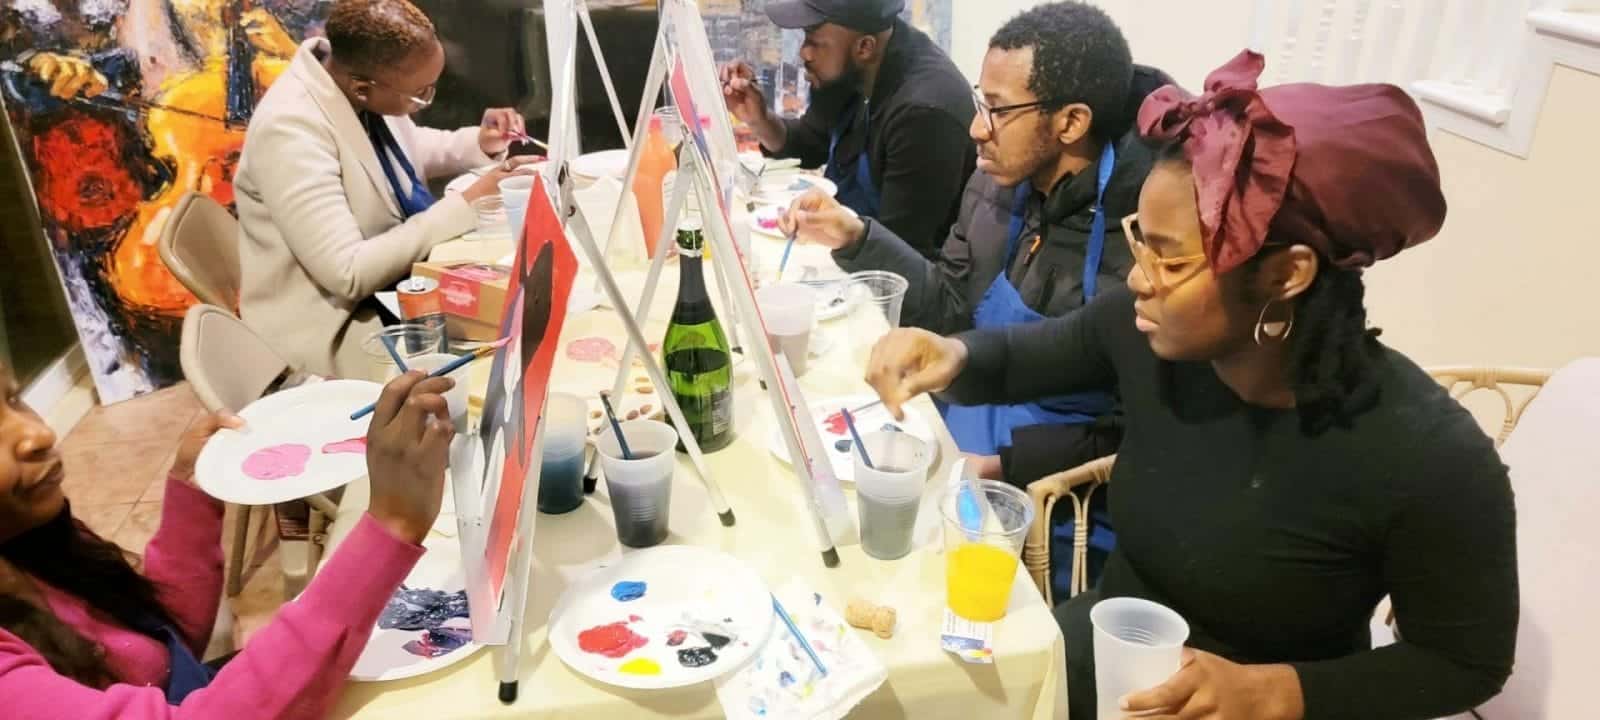 A group of people enjoying a paint and sip session in DC.